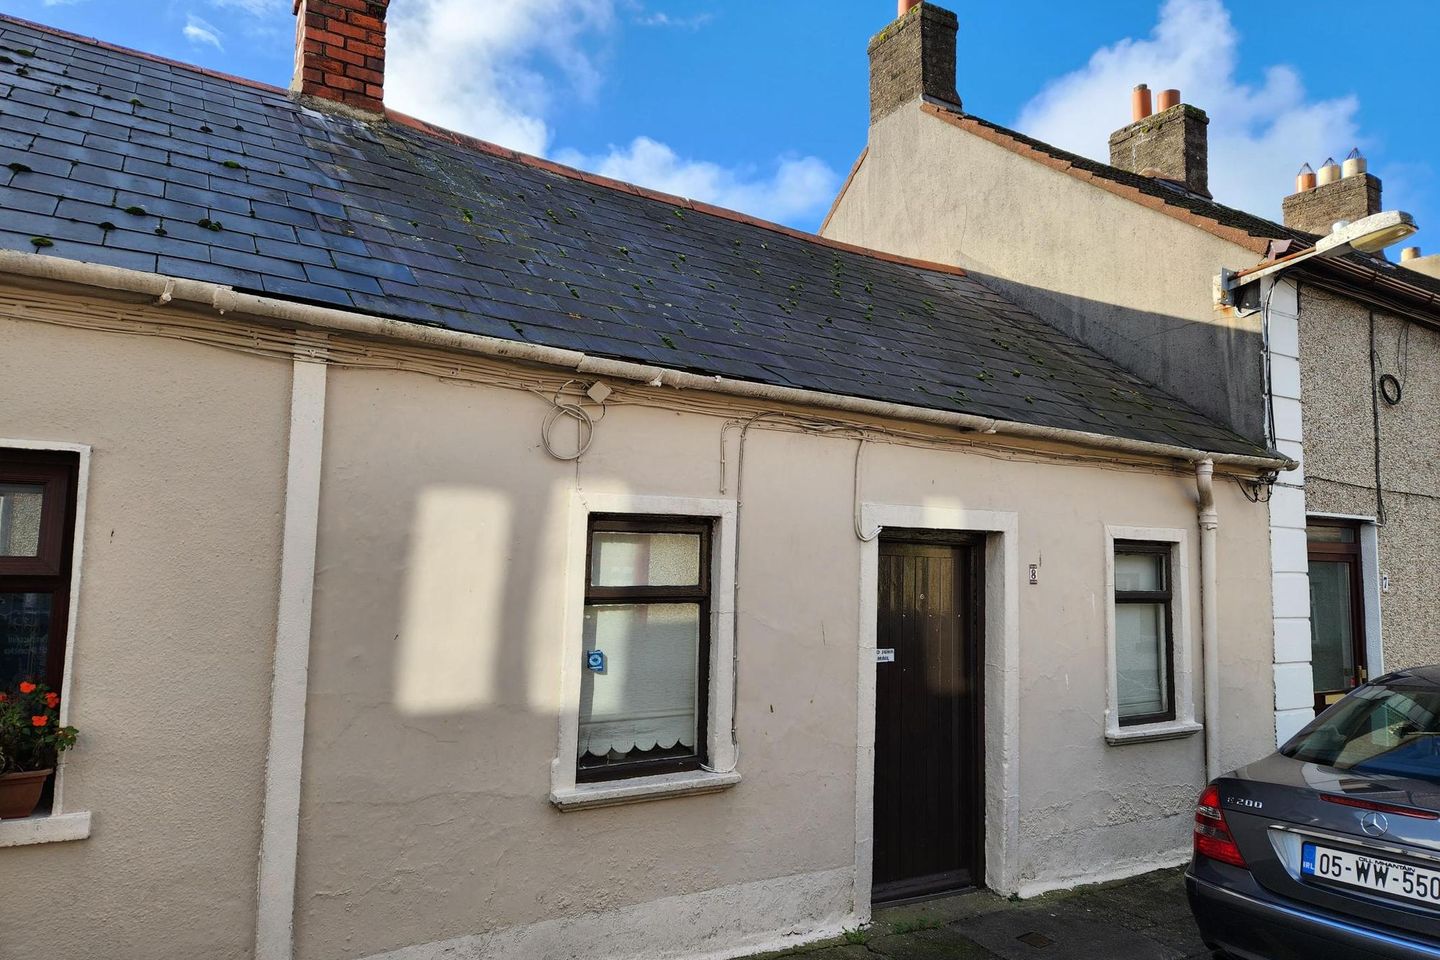 8 Andrew Street, Ballybricken, Waterford City, Co. Waterford, X91TP9P